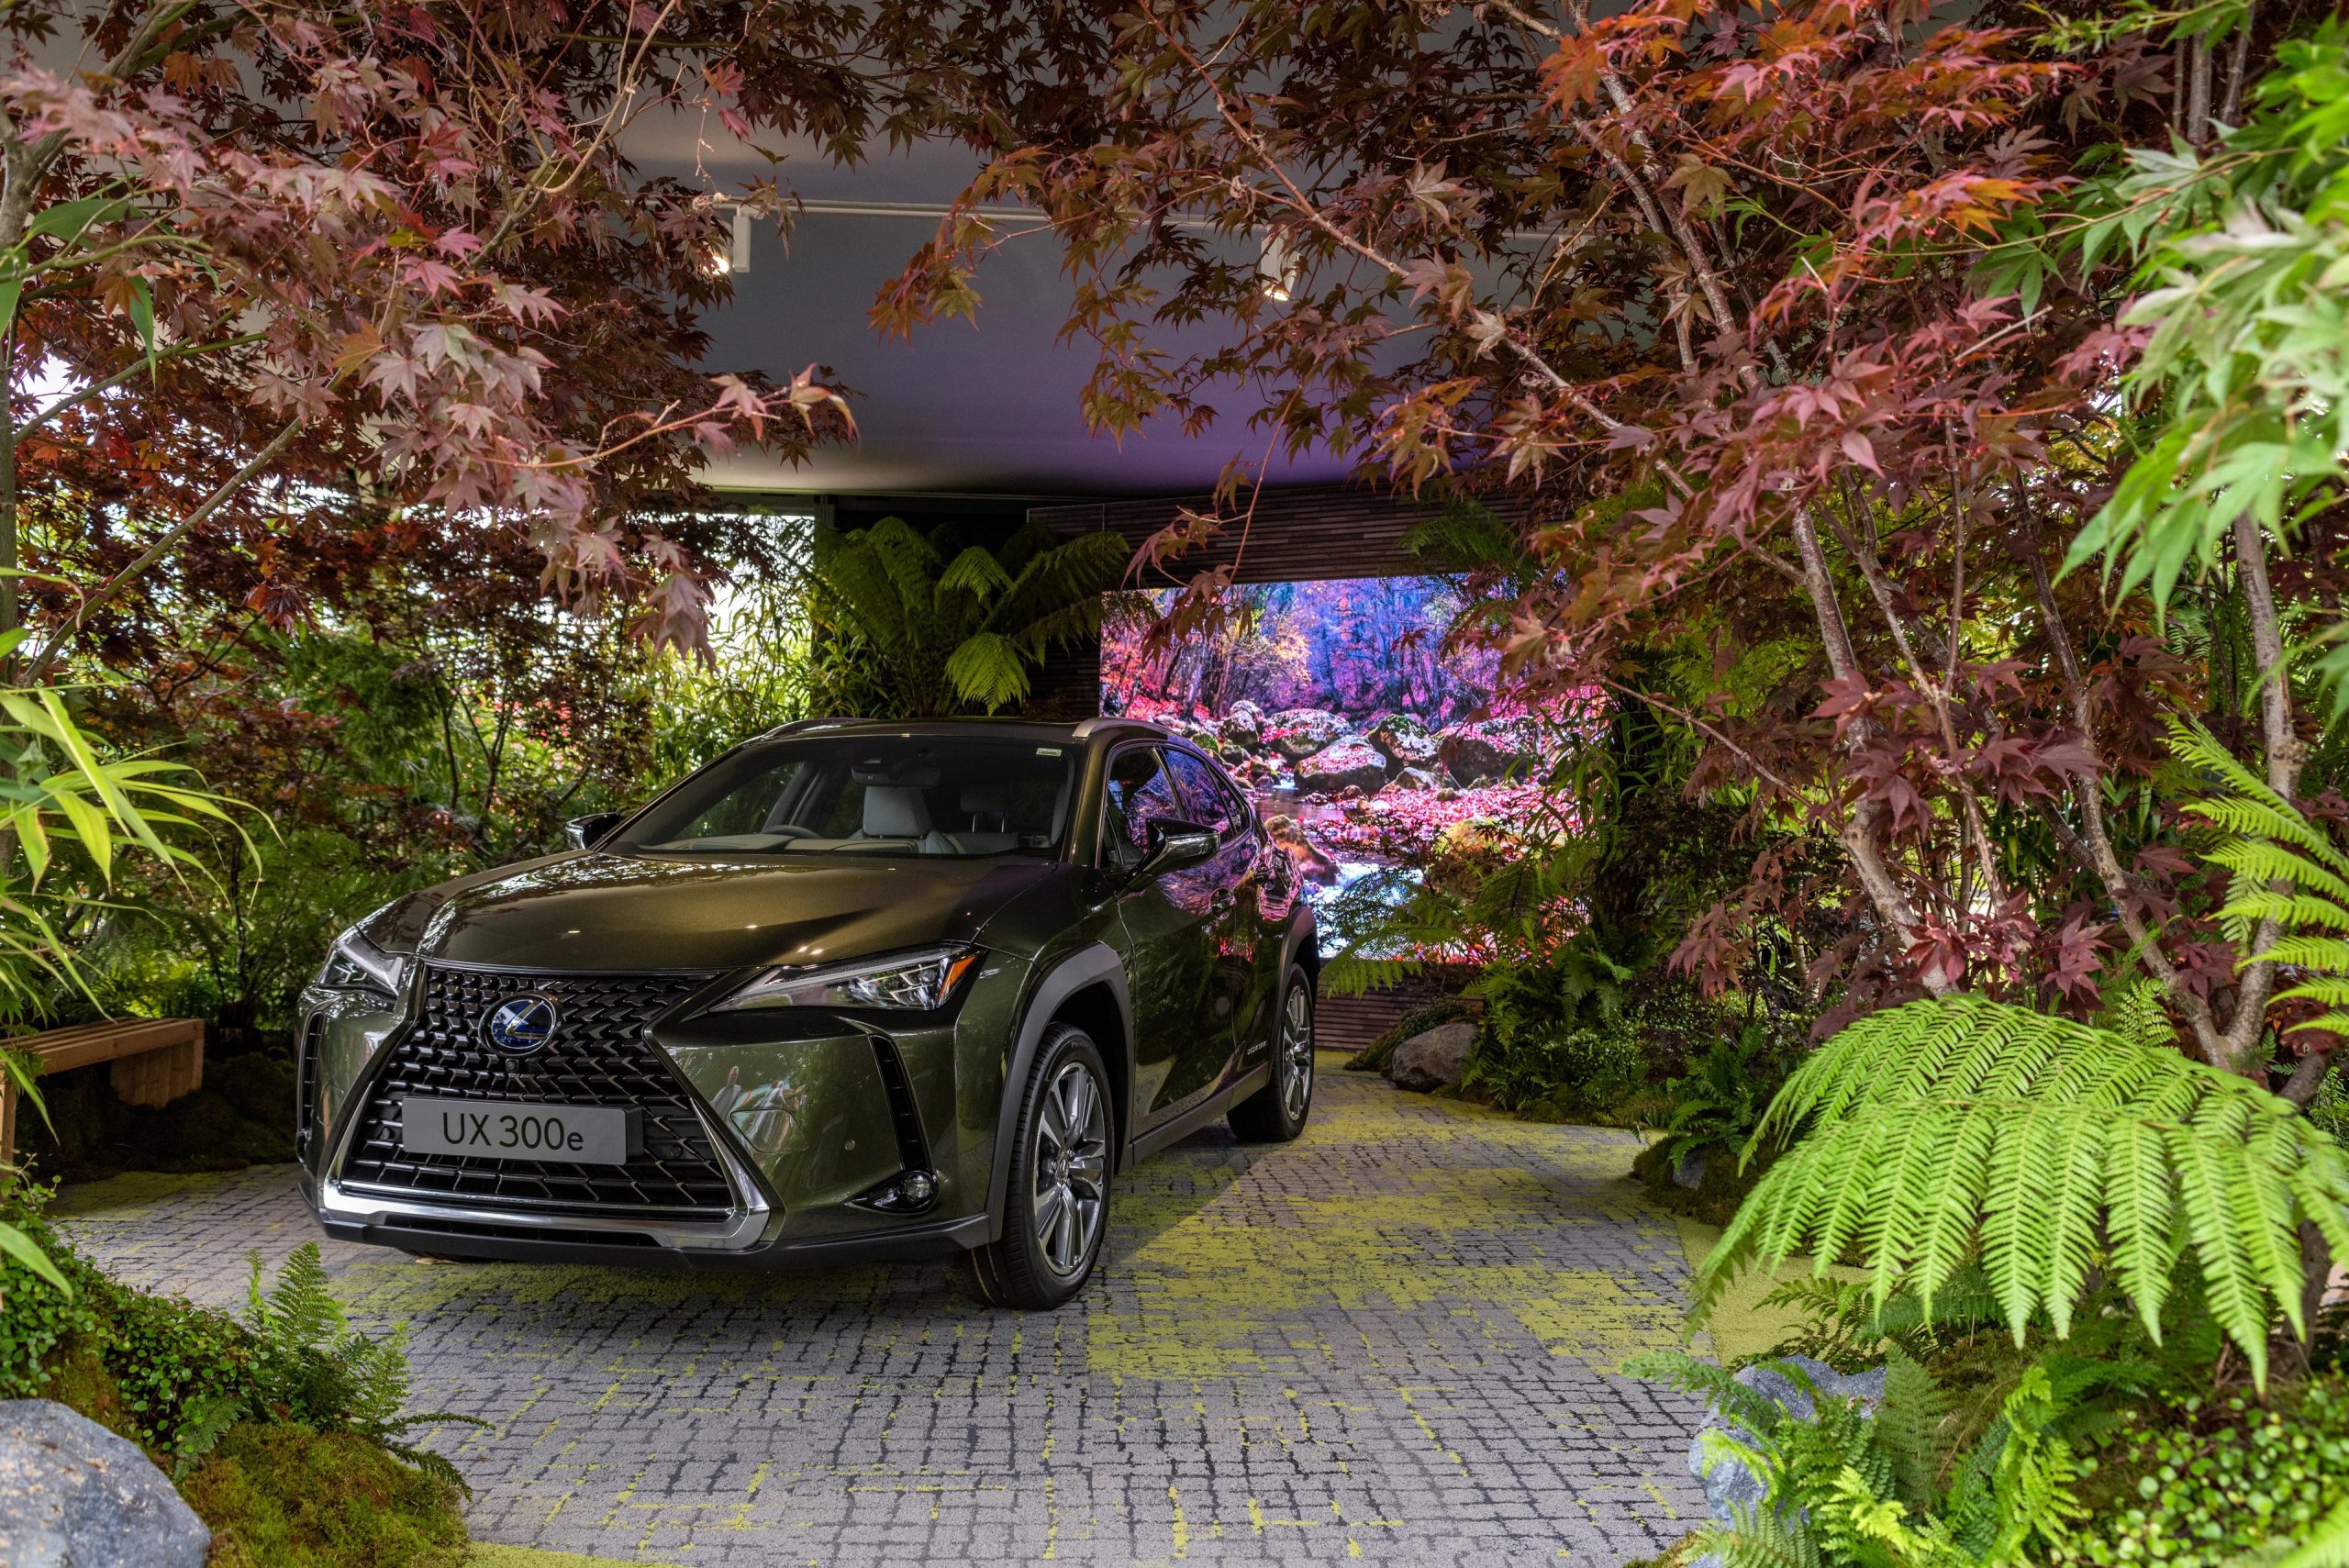 A captivating product shot of a brand new Lexus model car showcased in a brand activation set styled as a Japanese garden. The image exudes elegance and sophistication, capturing the essence of the event, expertly documented by Wright Content.